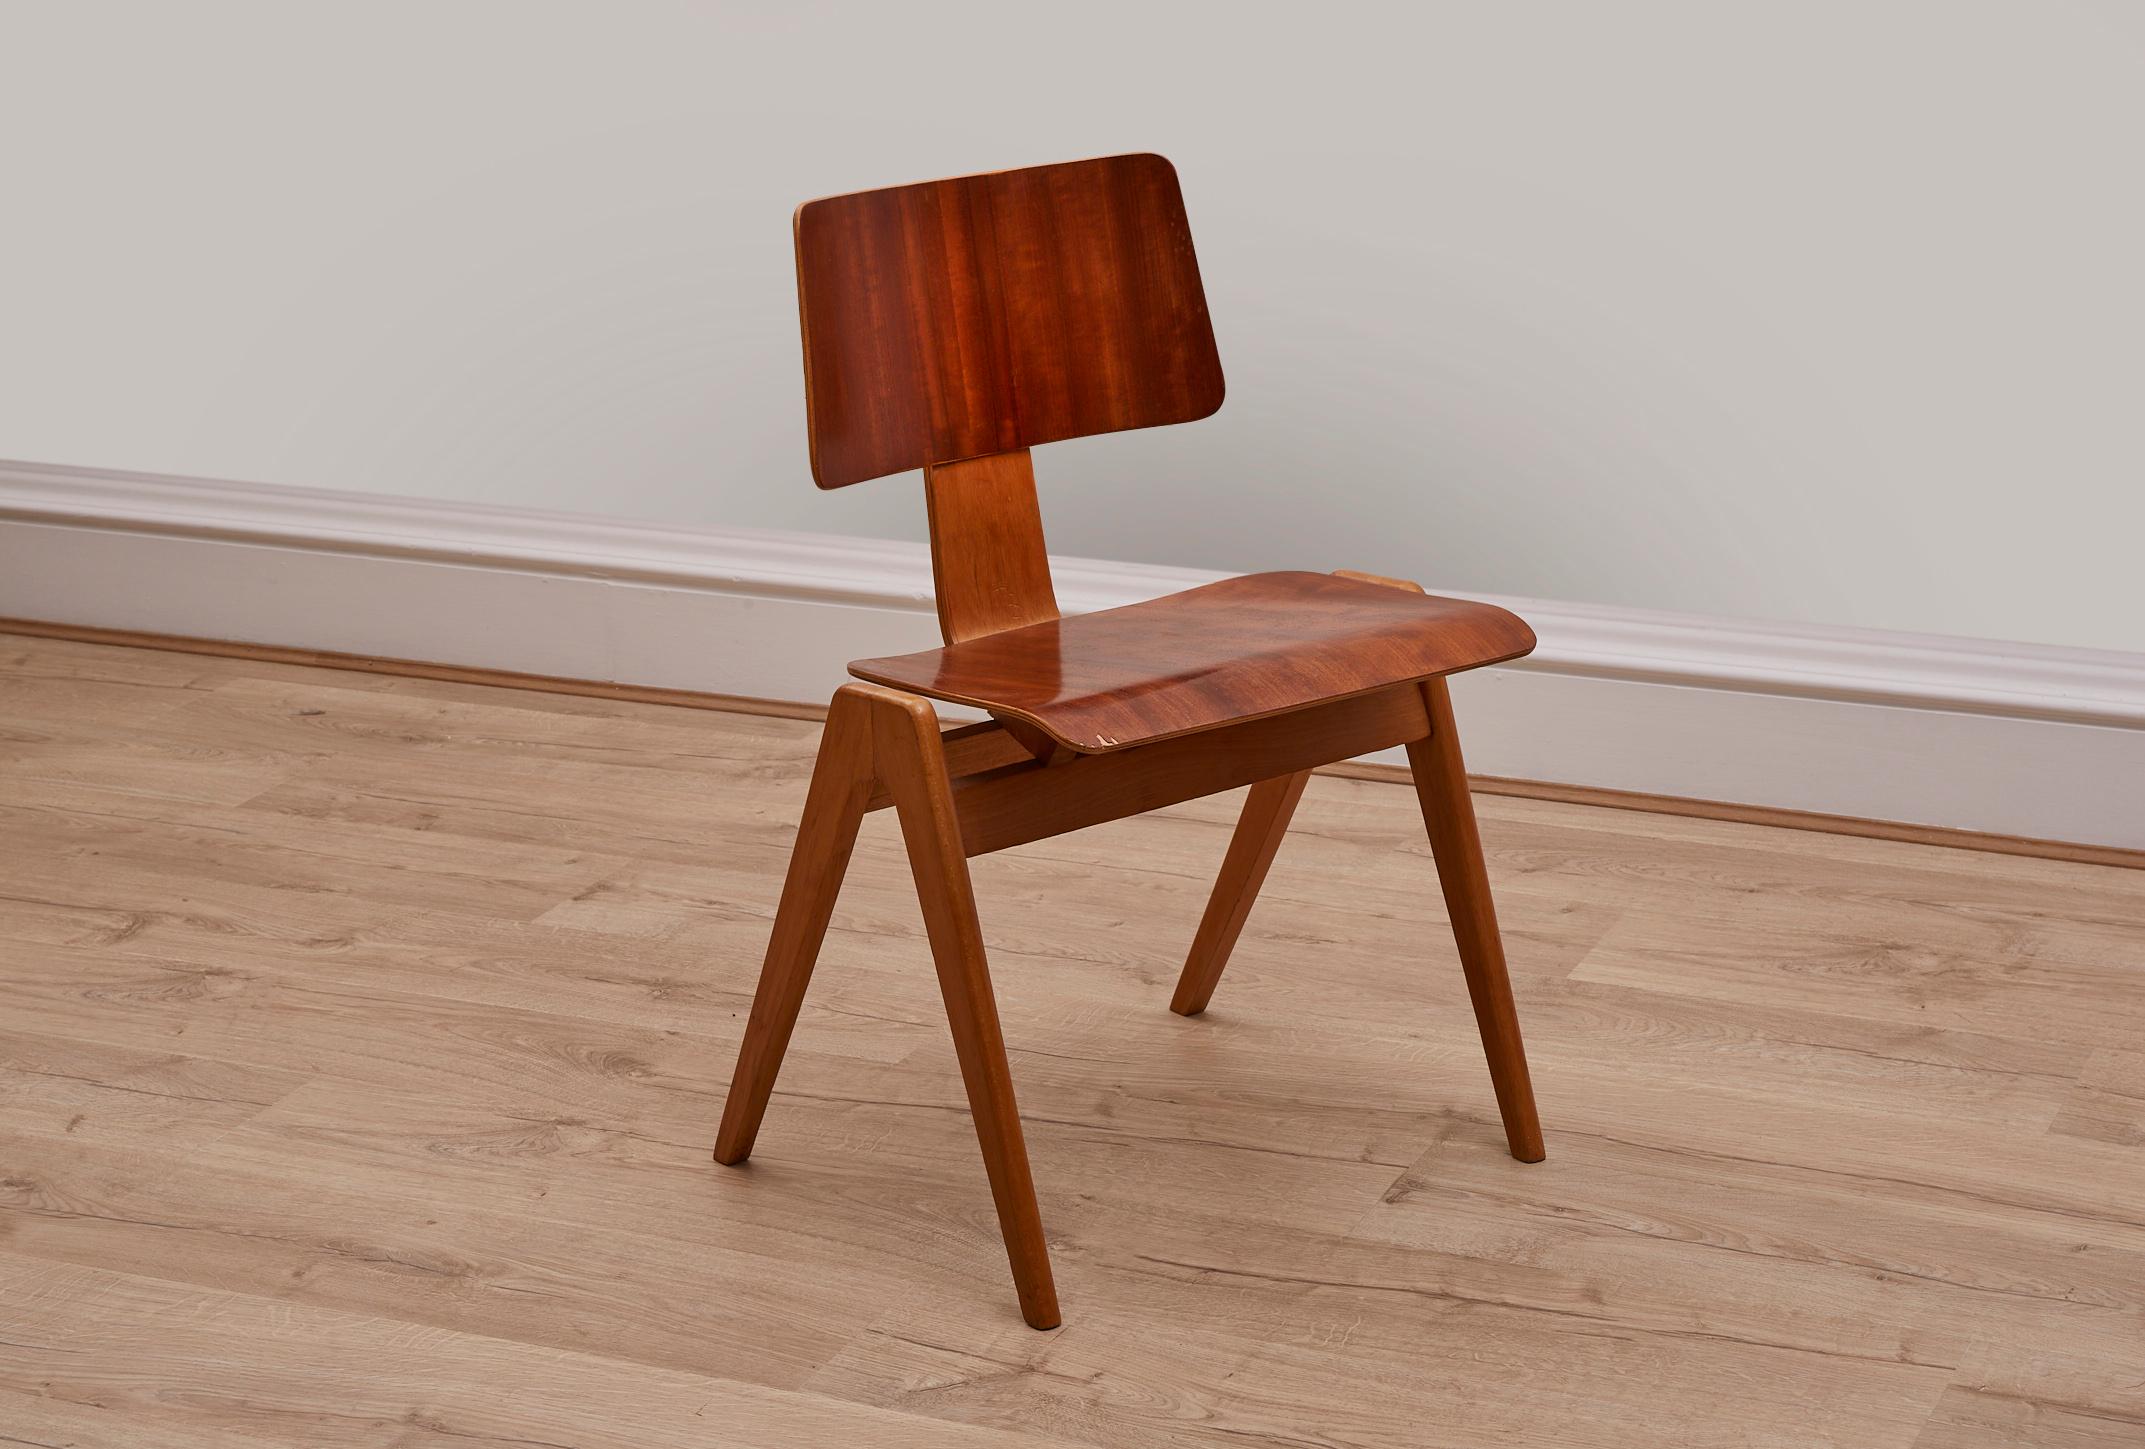 Vintage Robin Day Hillestak Chair,

Manufactured By Hille Od London  c1950's

This Beautiful Chair Has A Very Stylish Shape & Design. The Chair Has A Beech Frame With Plywood Seat & Back.